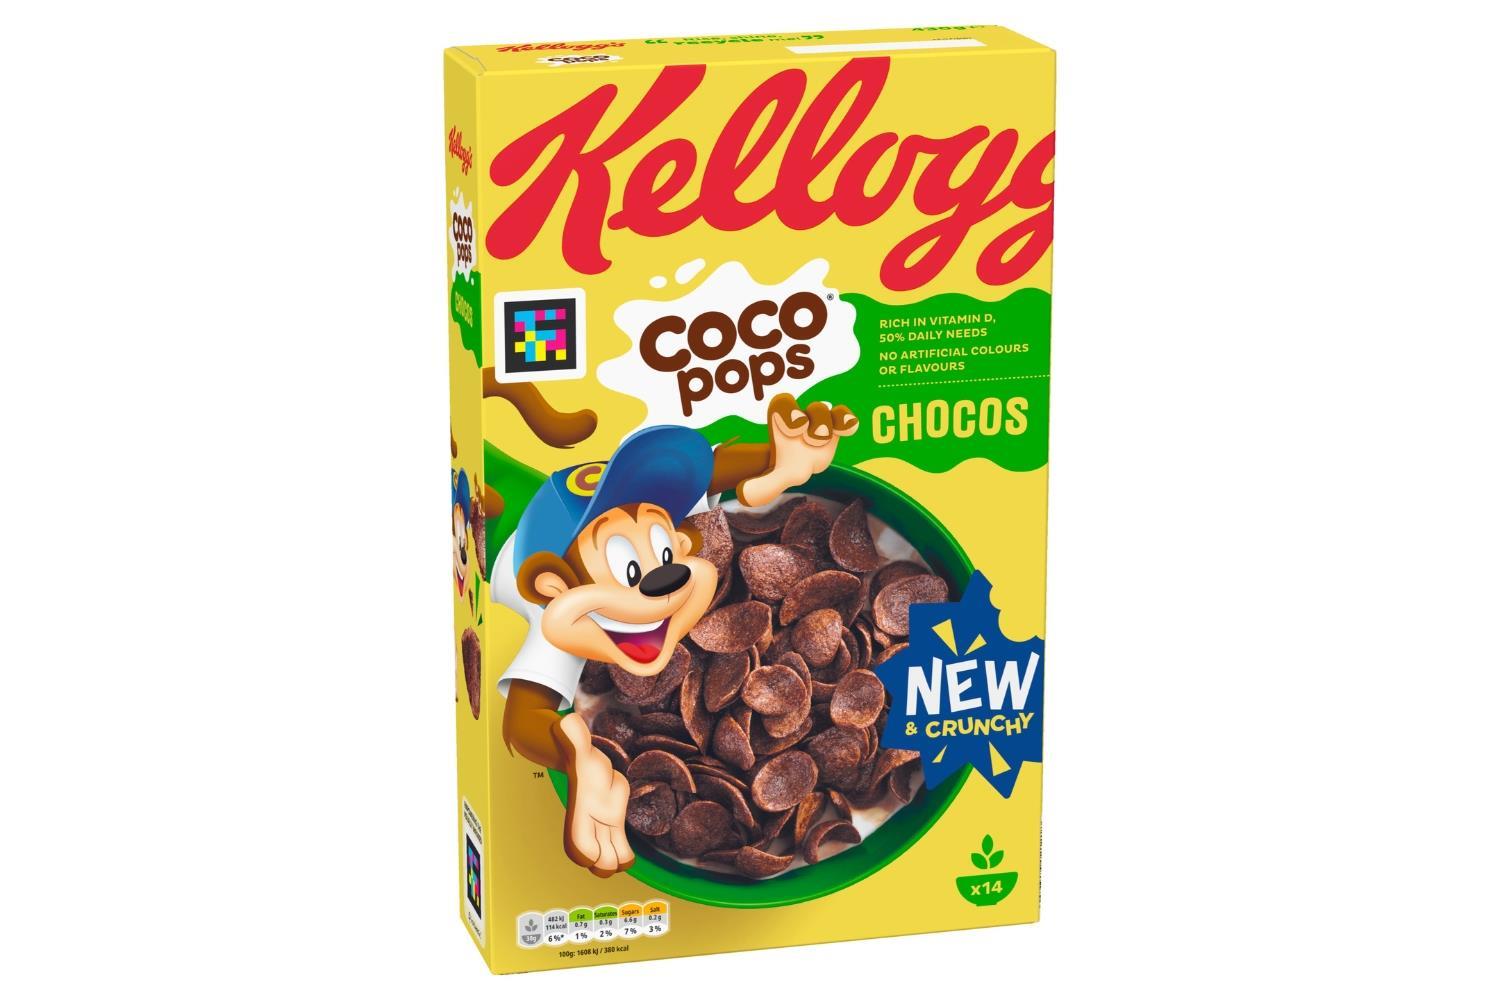 fundament wasserette Afrikaanse Kellogg's adds non-HFSS Chocos cereal to Coco Pops offering | News | The  Grocer